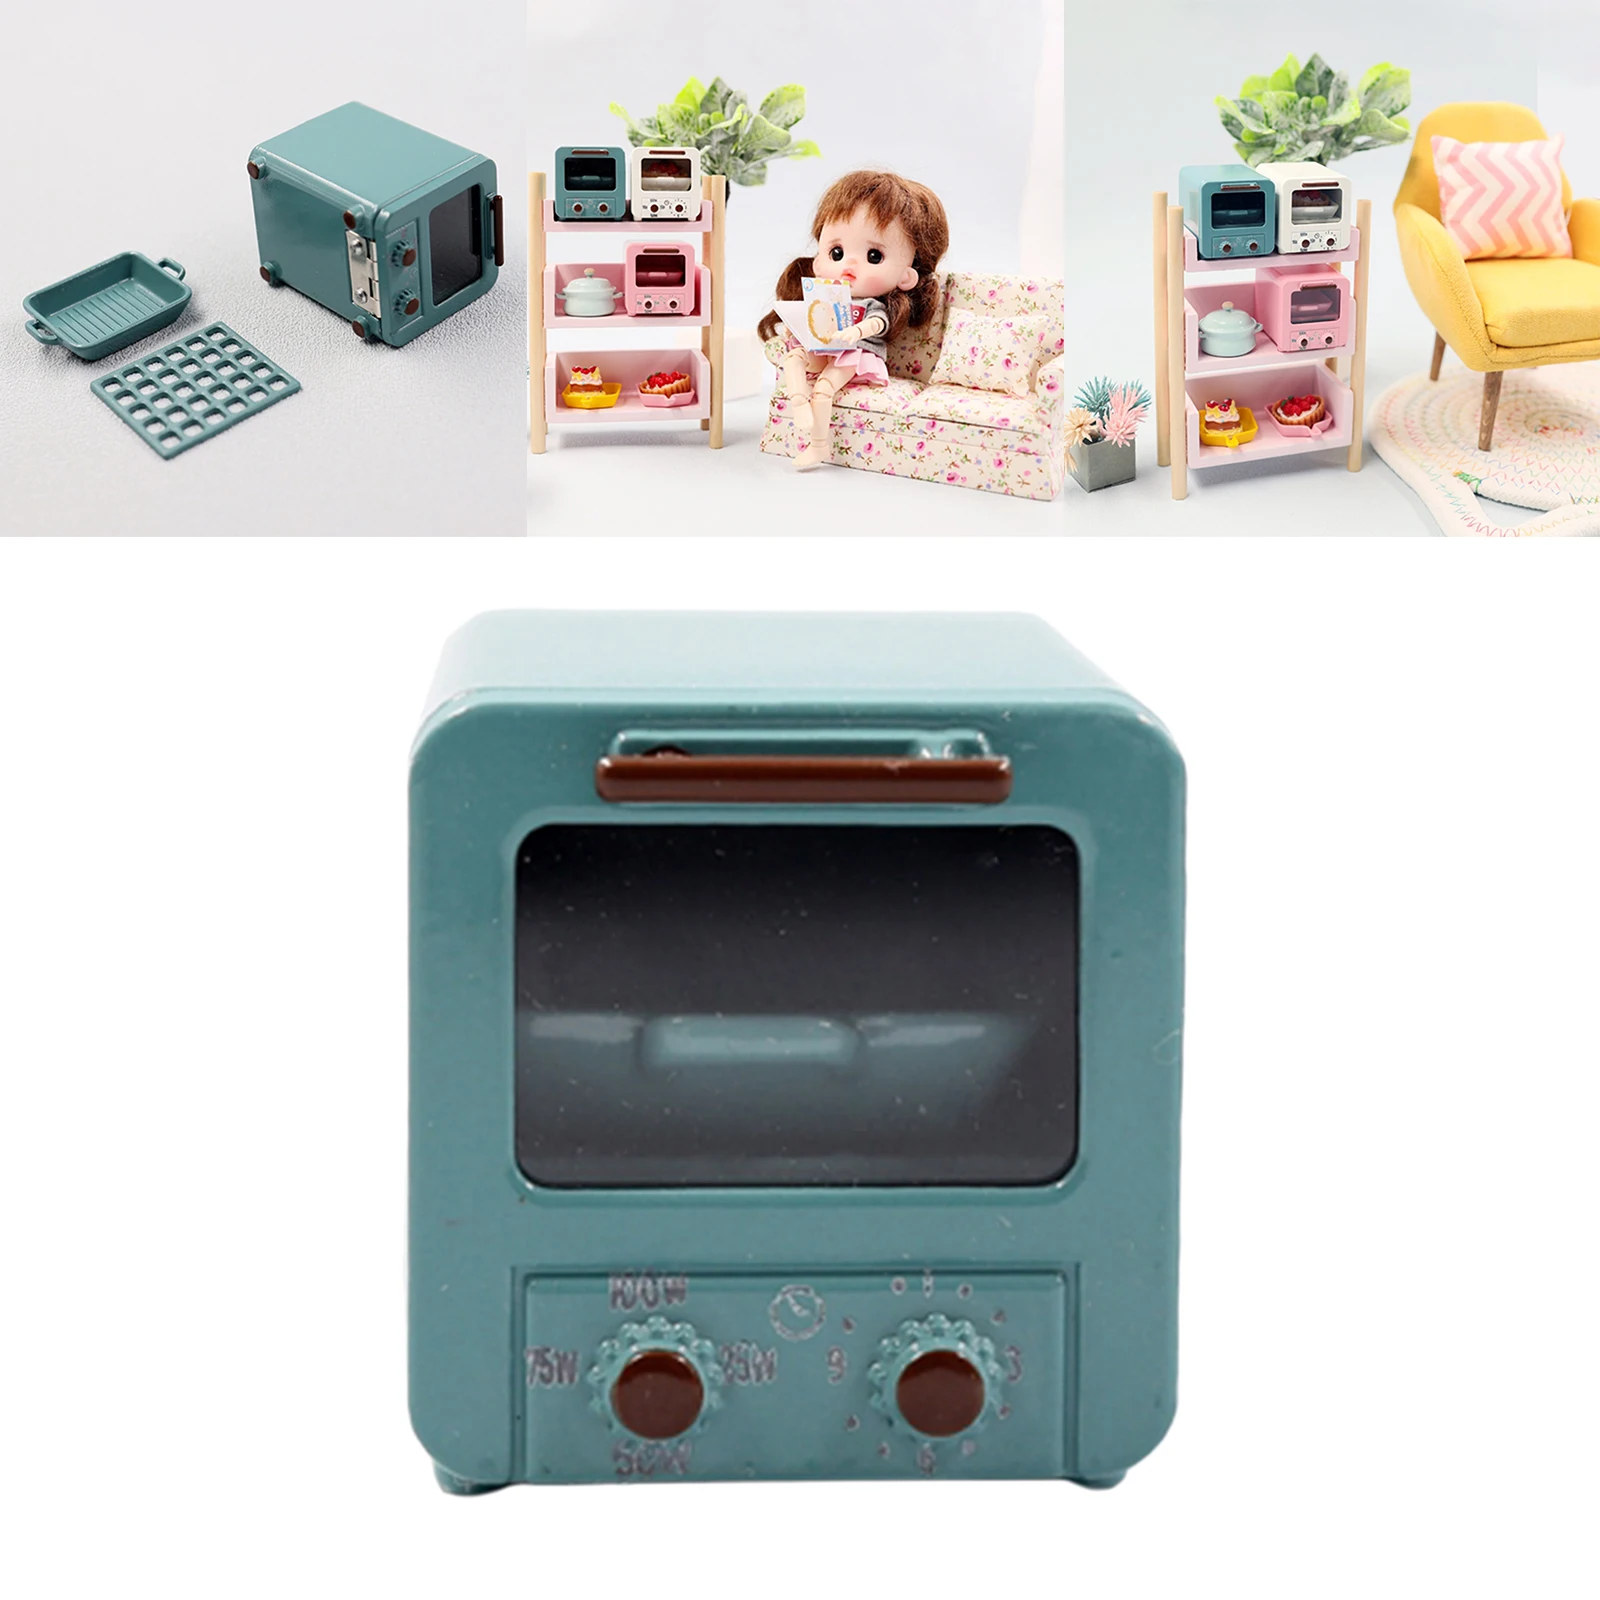 1:12 Mini Microwave Oven Display Model for 1/8 1/6 Miniature House Ornament